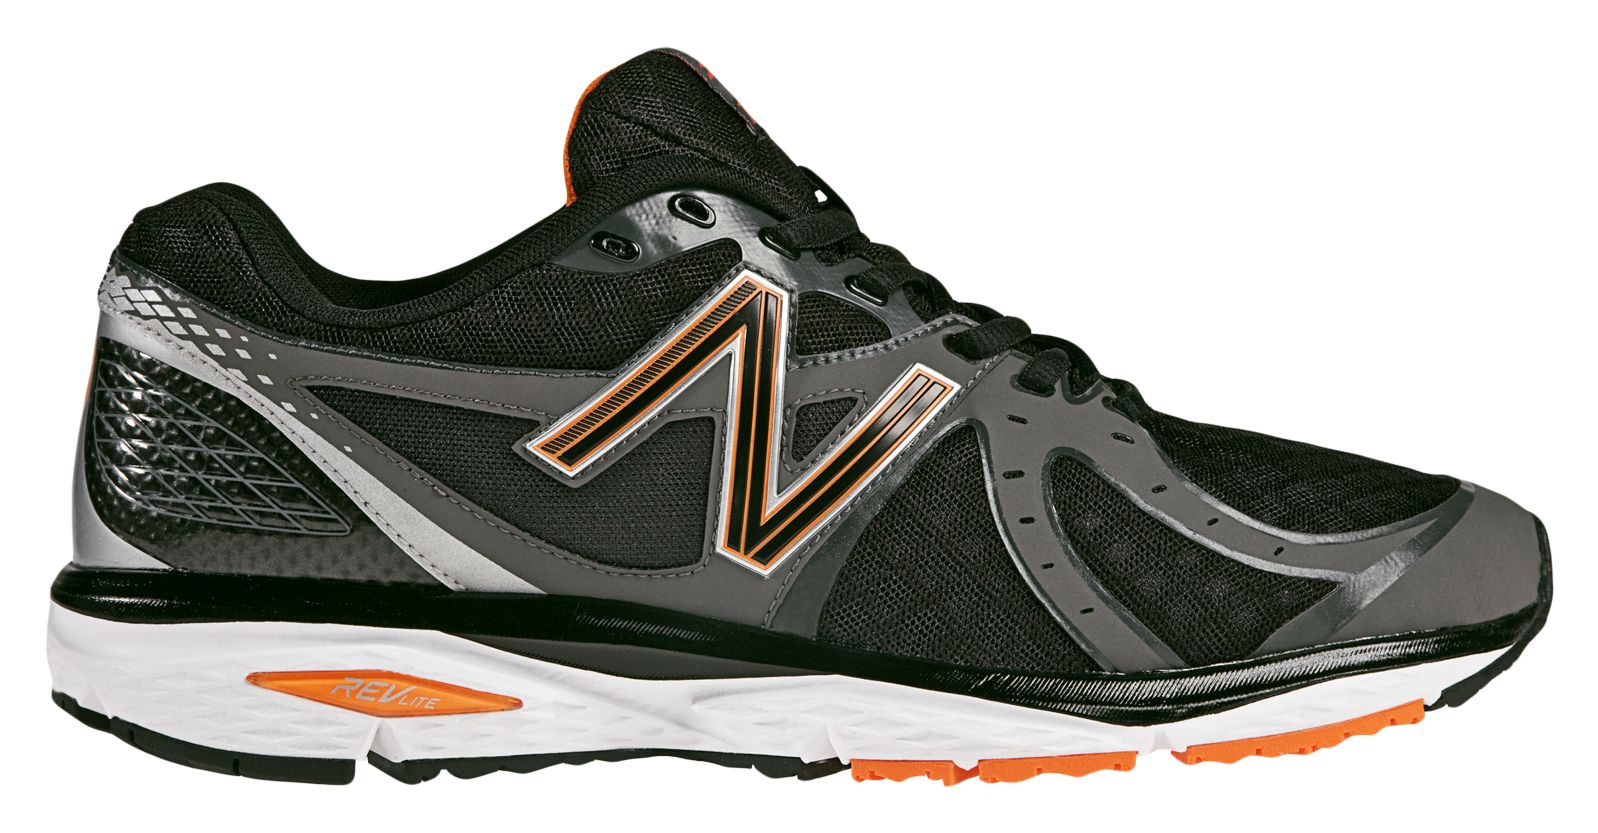 new balance m790 review